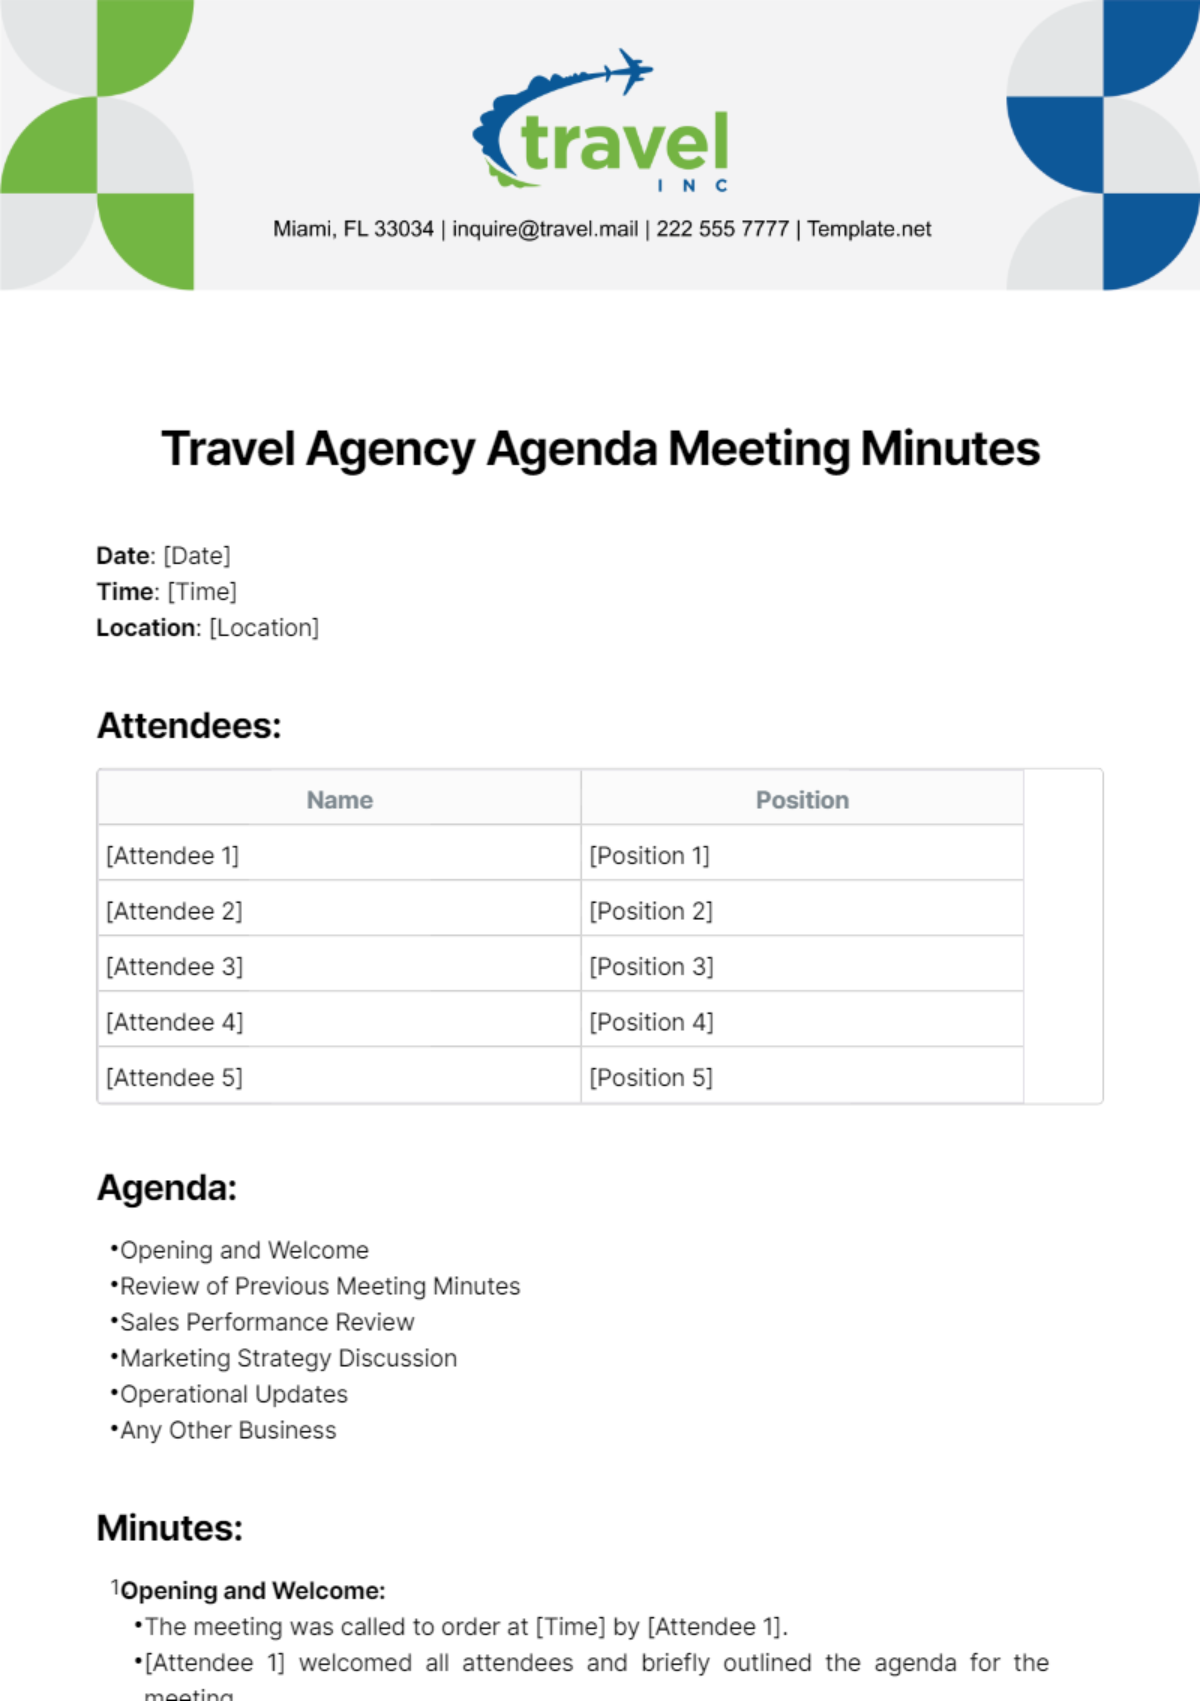 Travel Agency Agenda Meeting Minutes Template